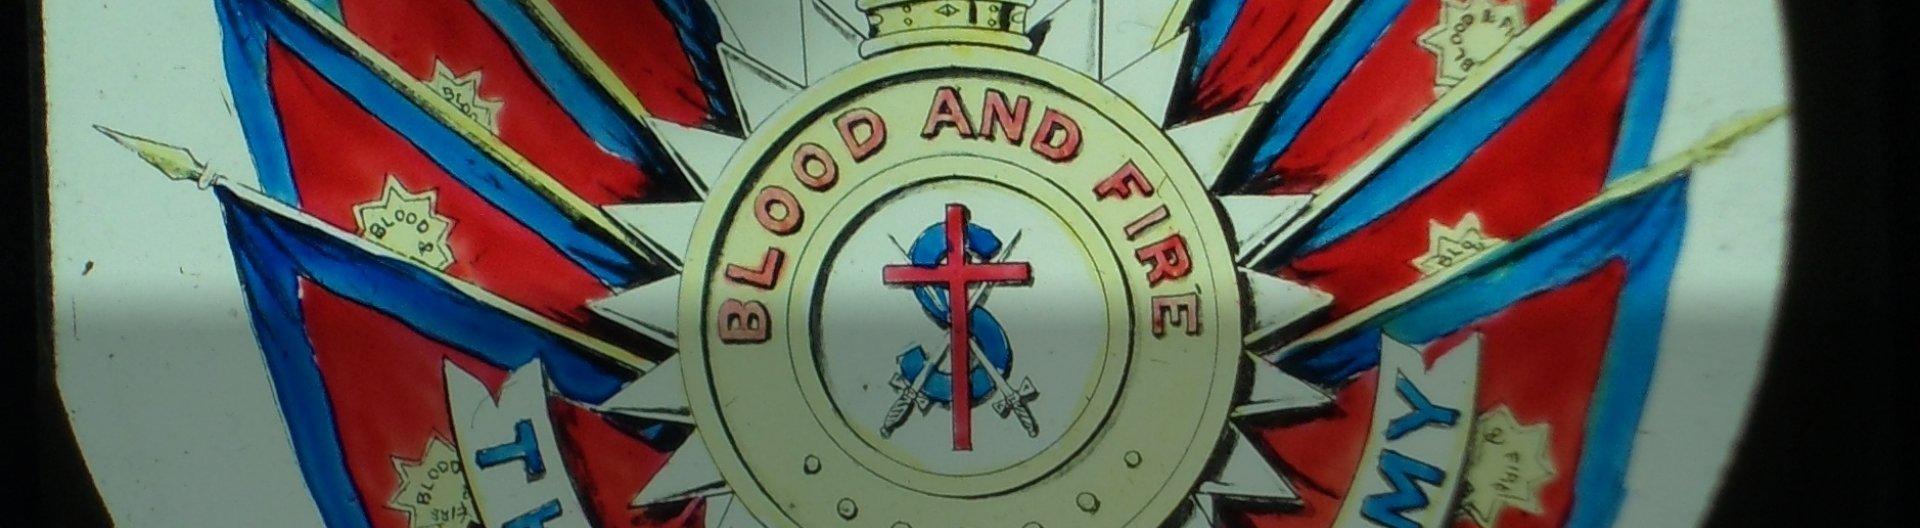 Blood and fire salvation army logo